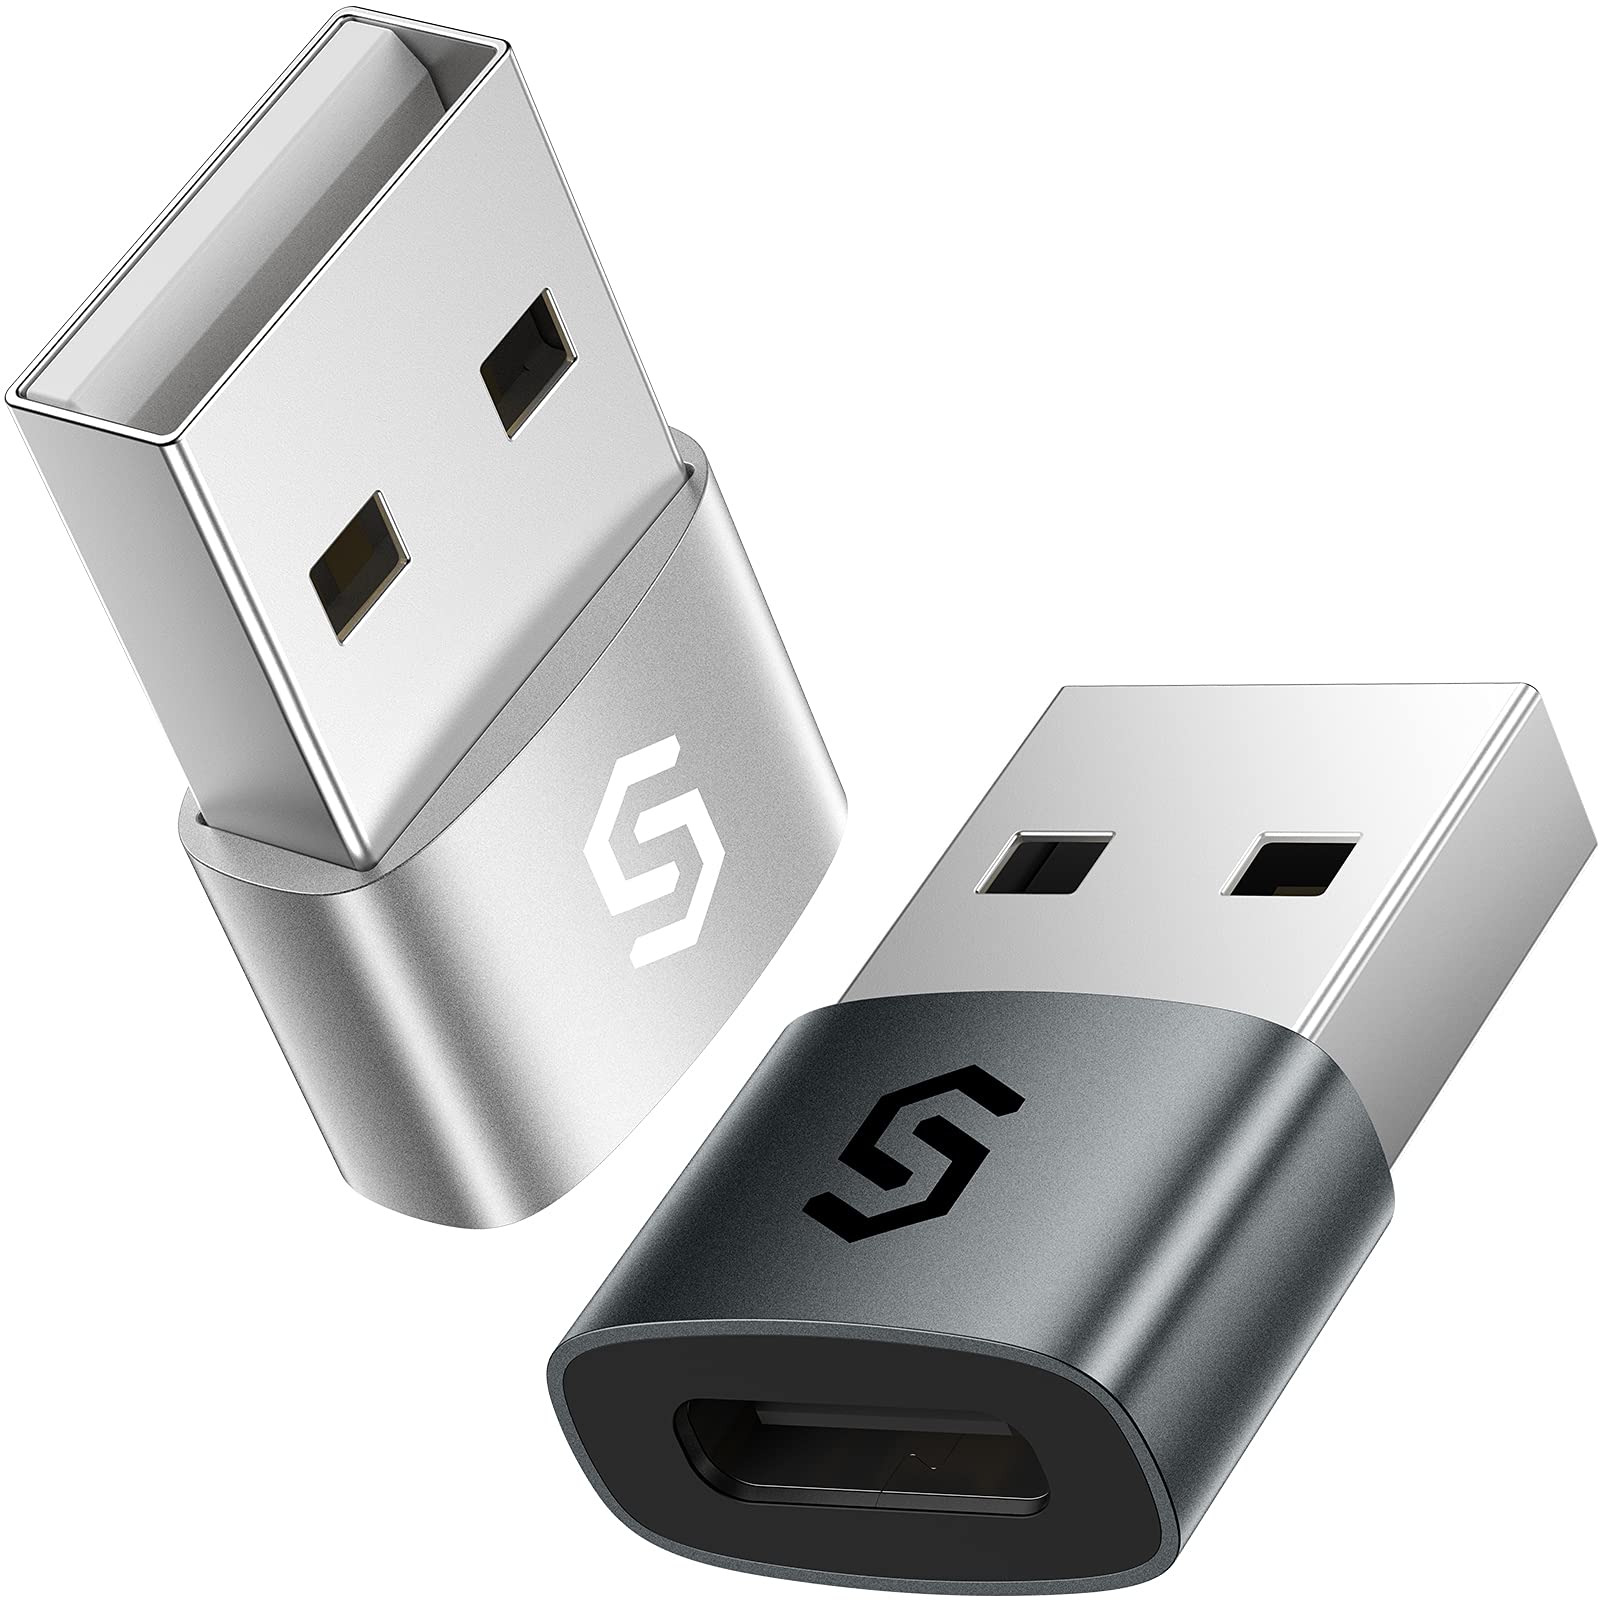 Syncwire USB C Female to USB Male Adapter 2 Pack,Type C to A Converter Adapter Compatible with iPhone 12 11 Pro Max,iPad,Laptops,Samsung Galaxy Note 10 S20 Plus 20 FE Ultra,Google Pixel 5 4 4a 3 2 XL